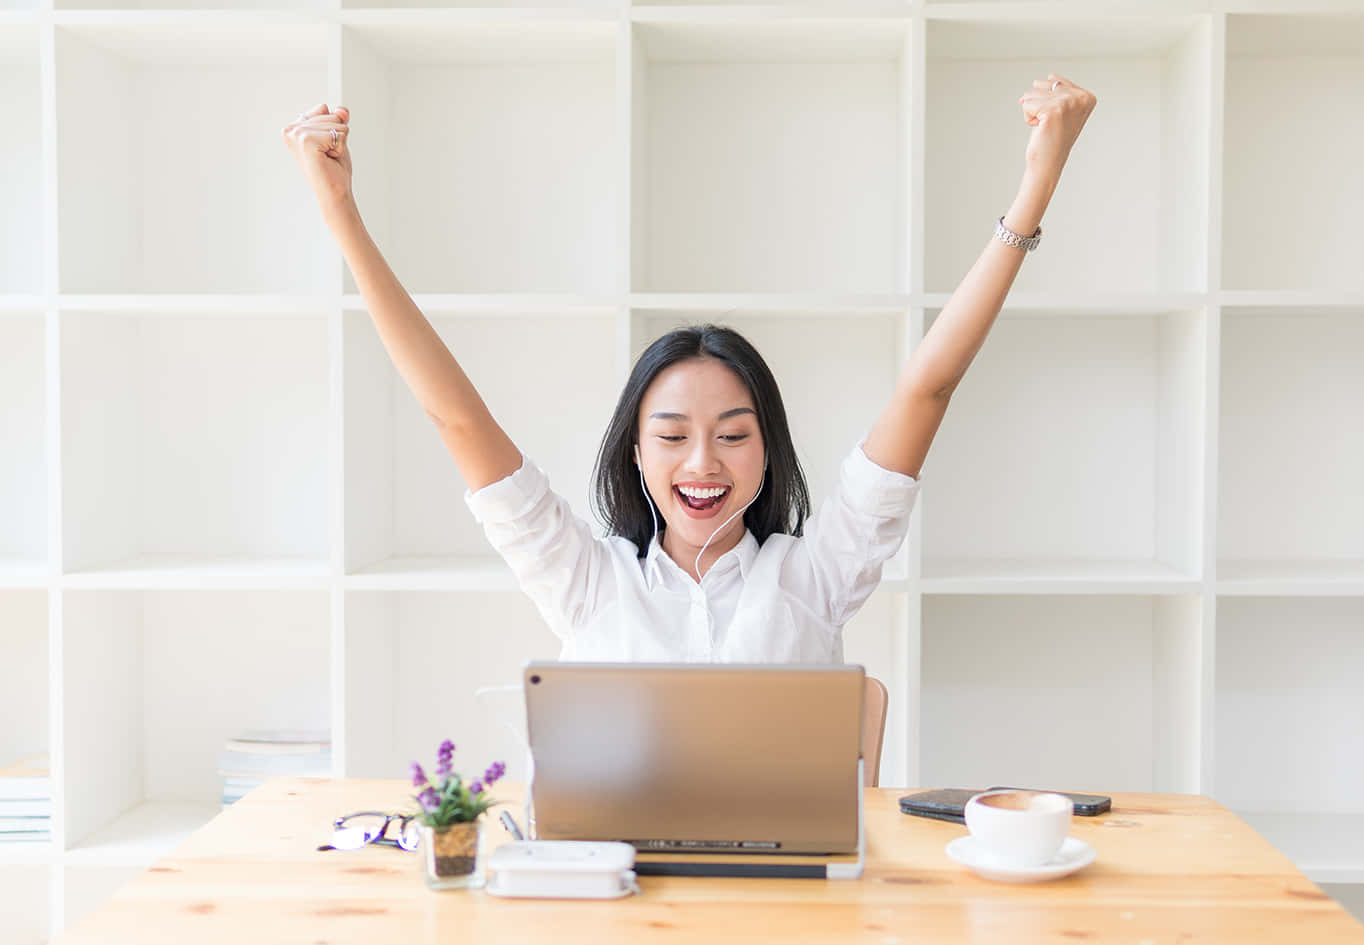 Asian Woman Celebrating Success With Her Arms Raised In The Air